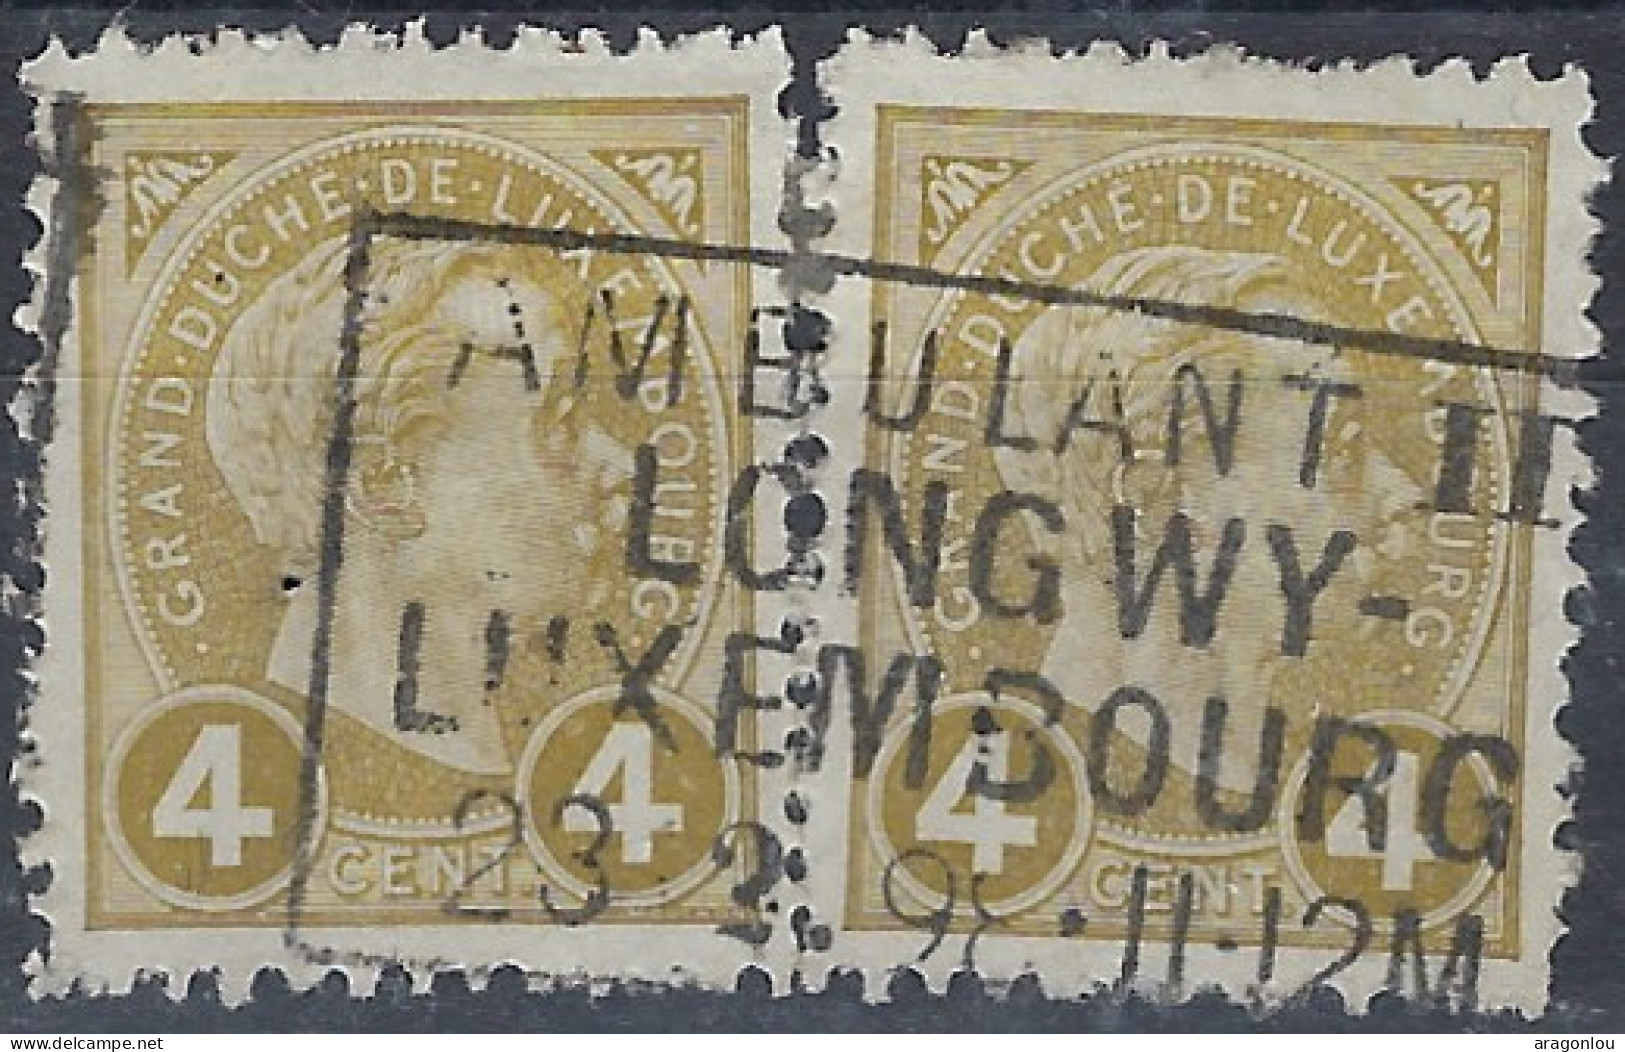 Luxembourg - Luxemburg - Timbres - Adolphe  -  Cachet  Ambulant  -  Longwy - Luxembourg   Paire   ° - 1895 Adolfo Di Profilo